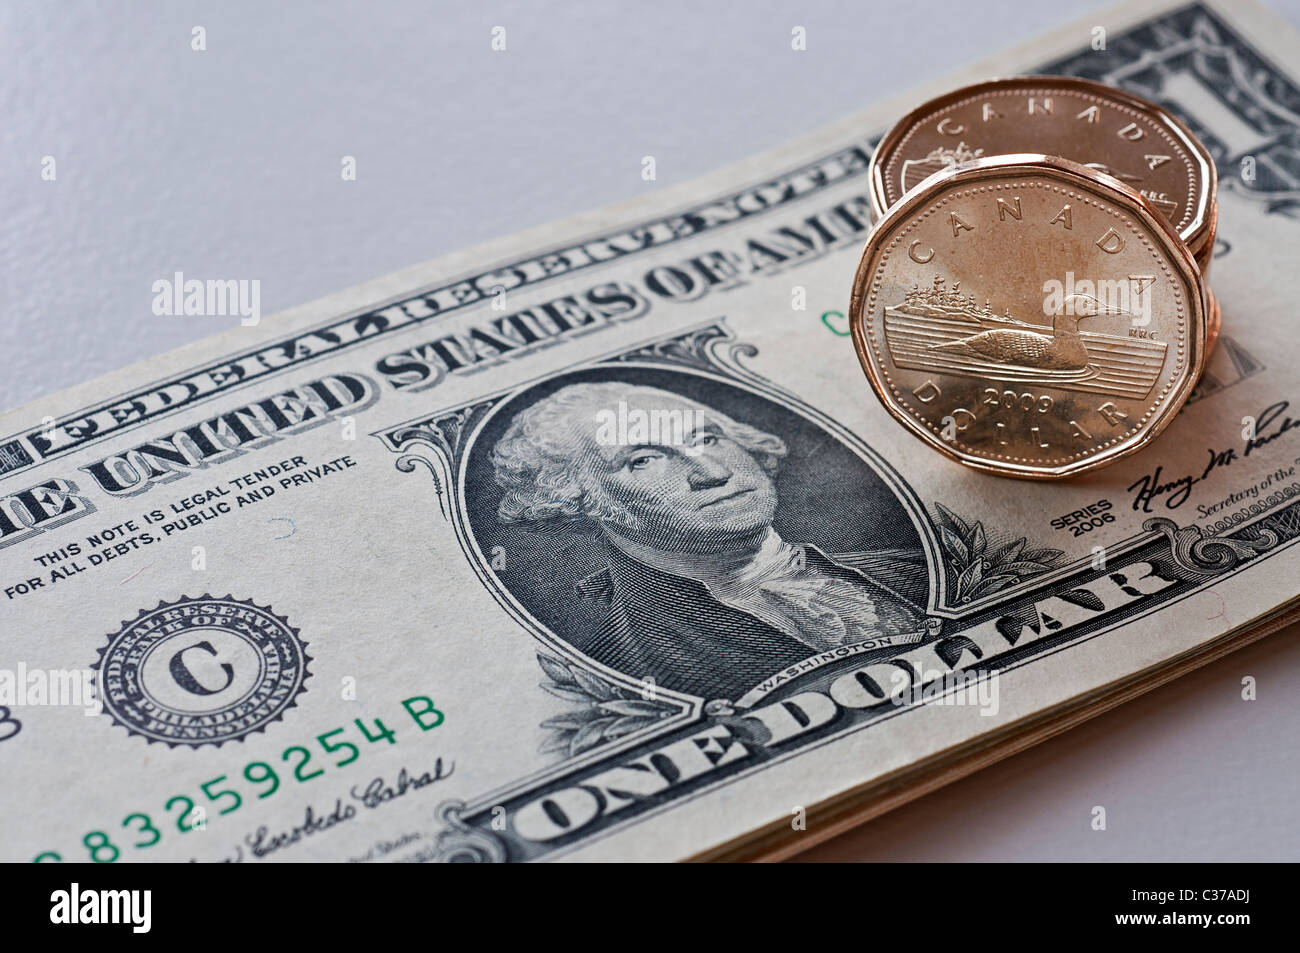 Money; US $1 dollar bills and Canadian $1 dollar coins (loonies Stock Photo  - Alamy